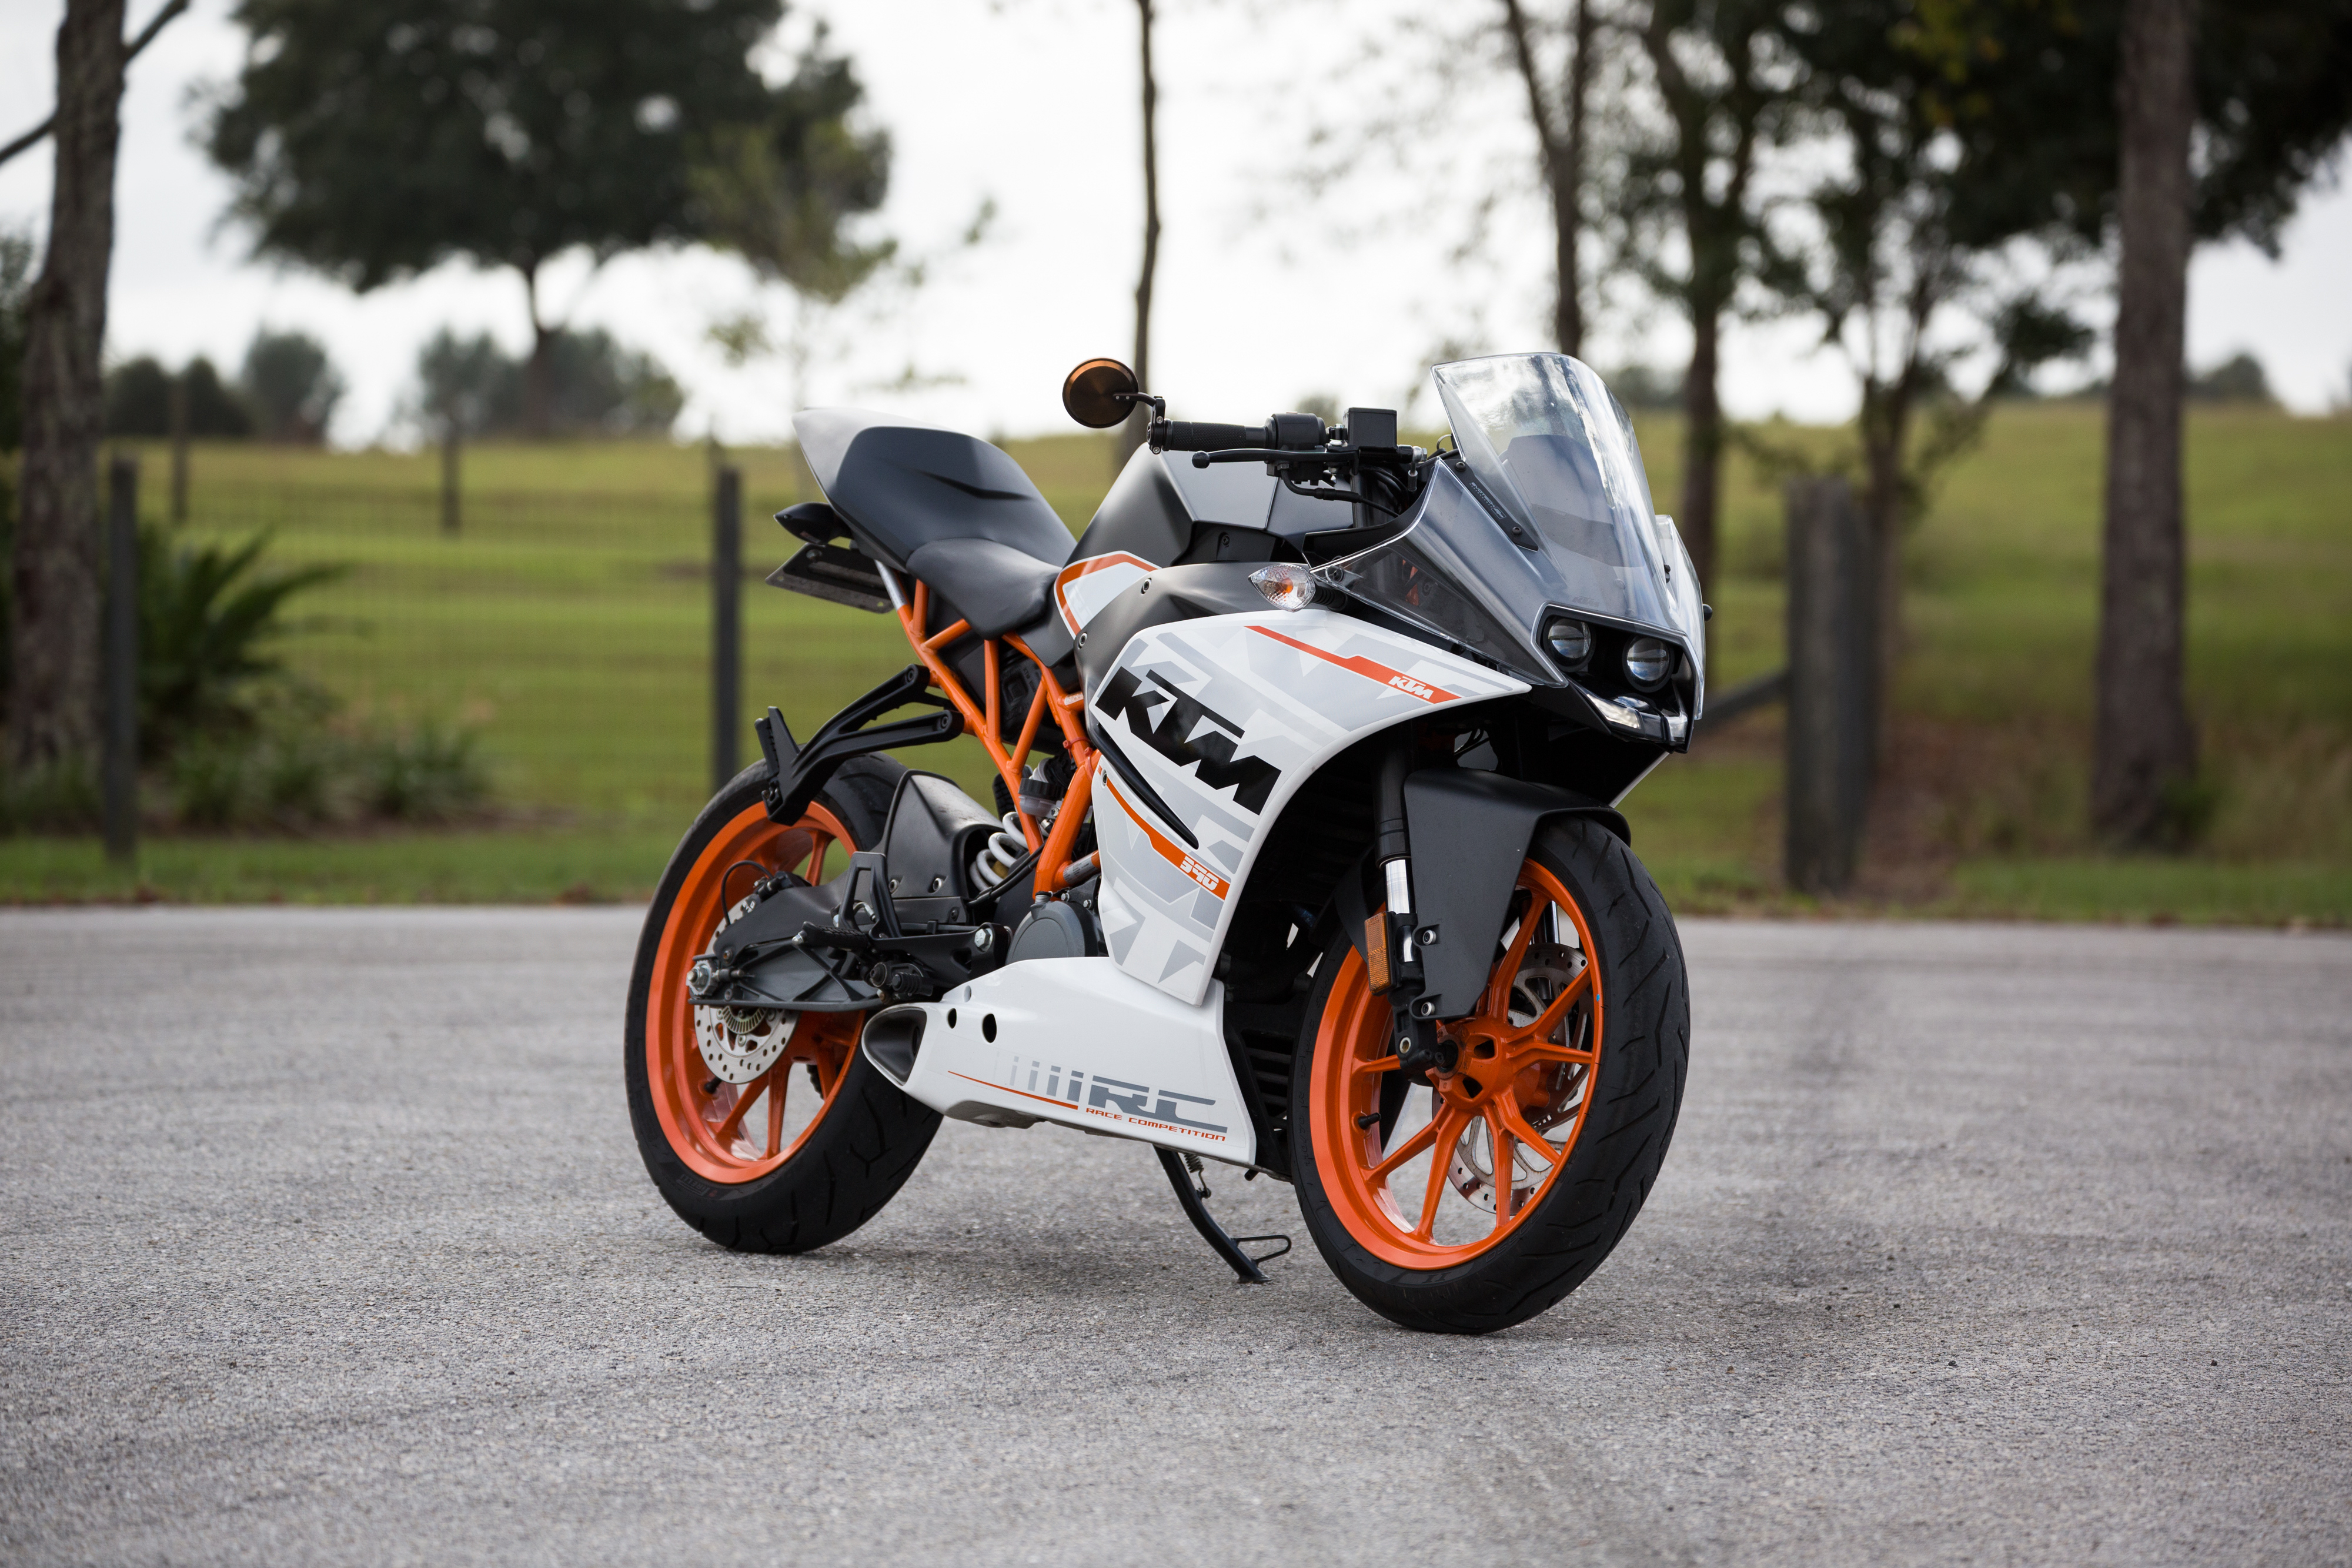 ktm, motorcycles, motorcycle, side view